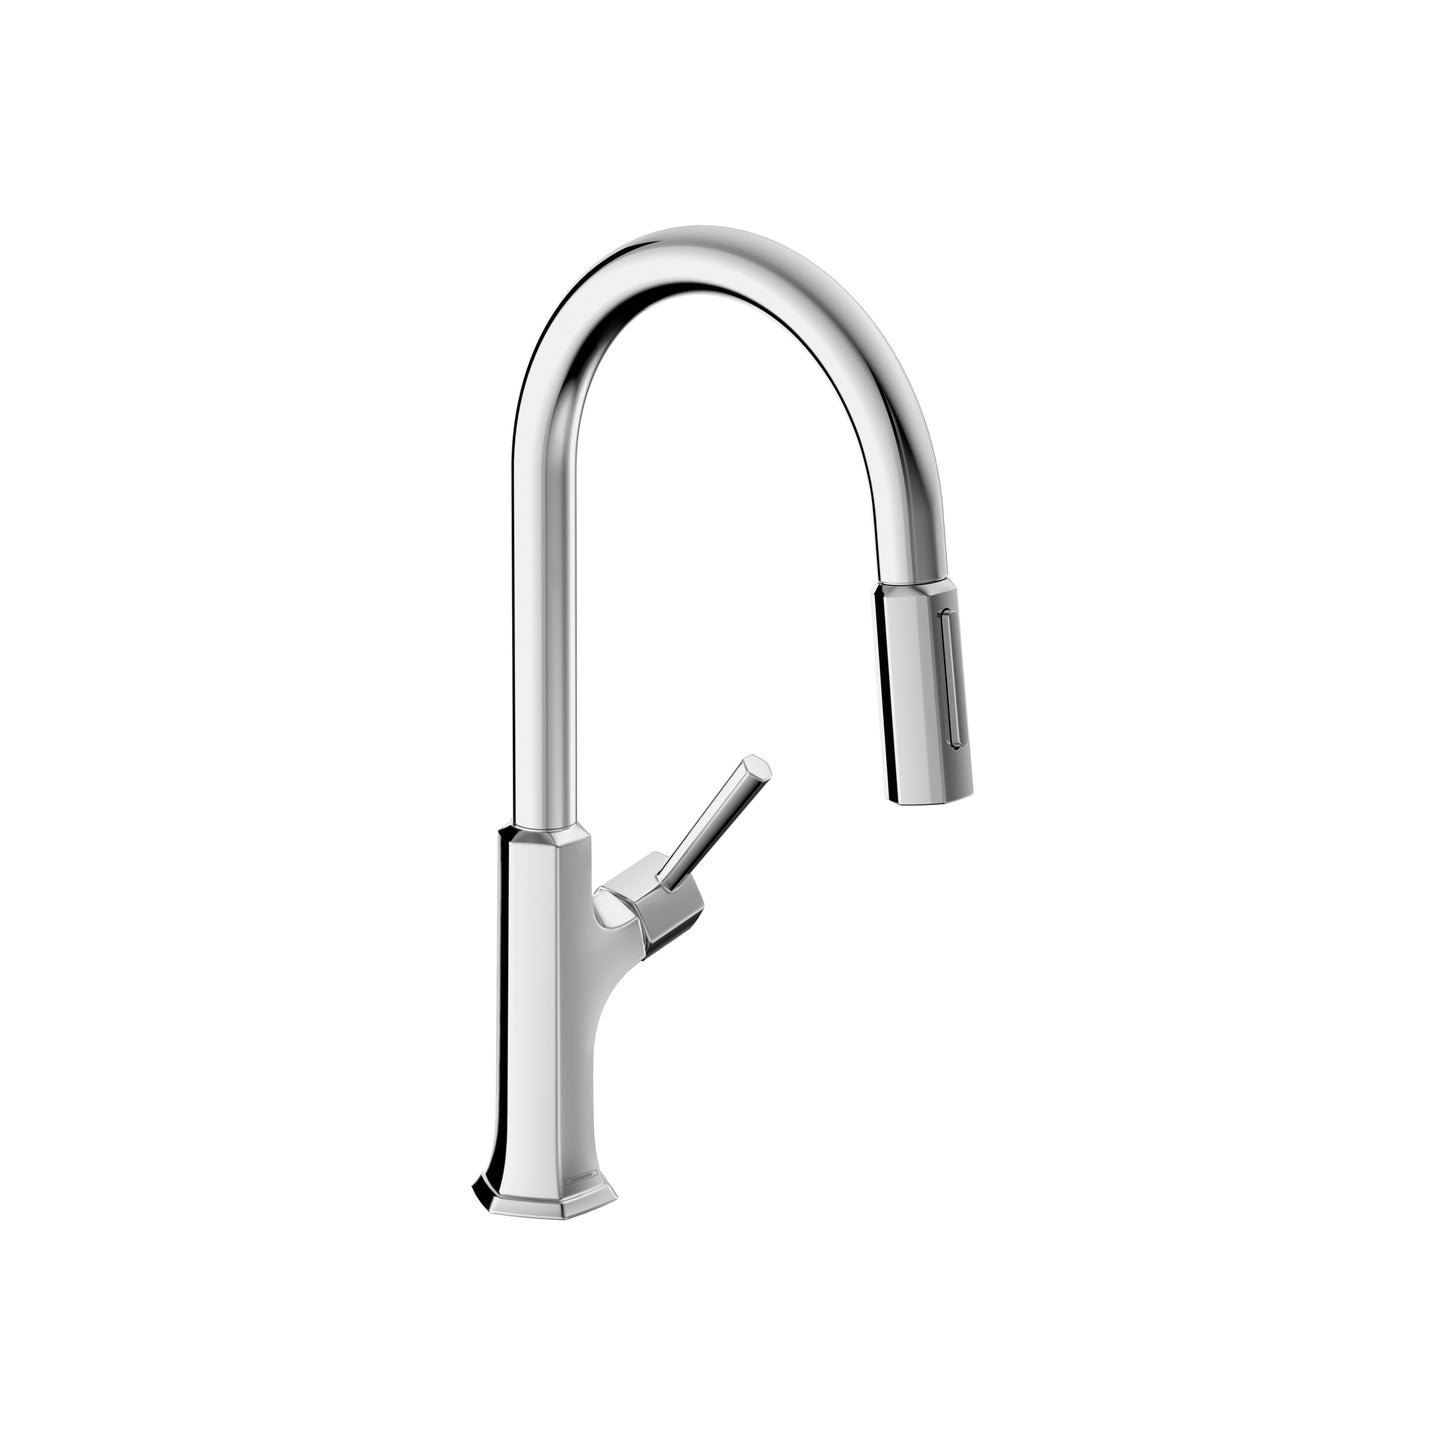 HANSGROHE 04852000 Chrome Locarno Transitional Kitchen Faucet 1.75 GPM